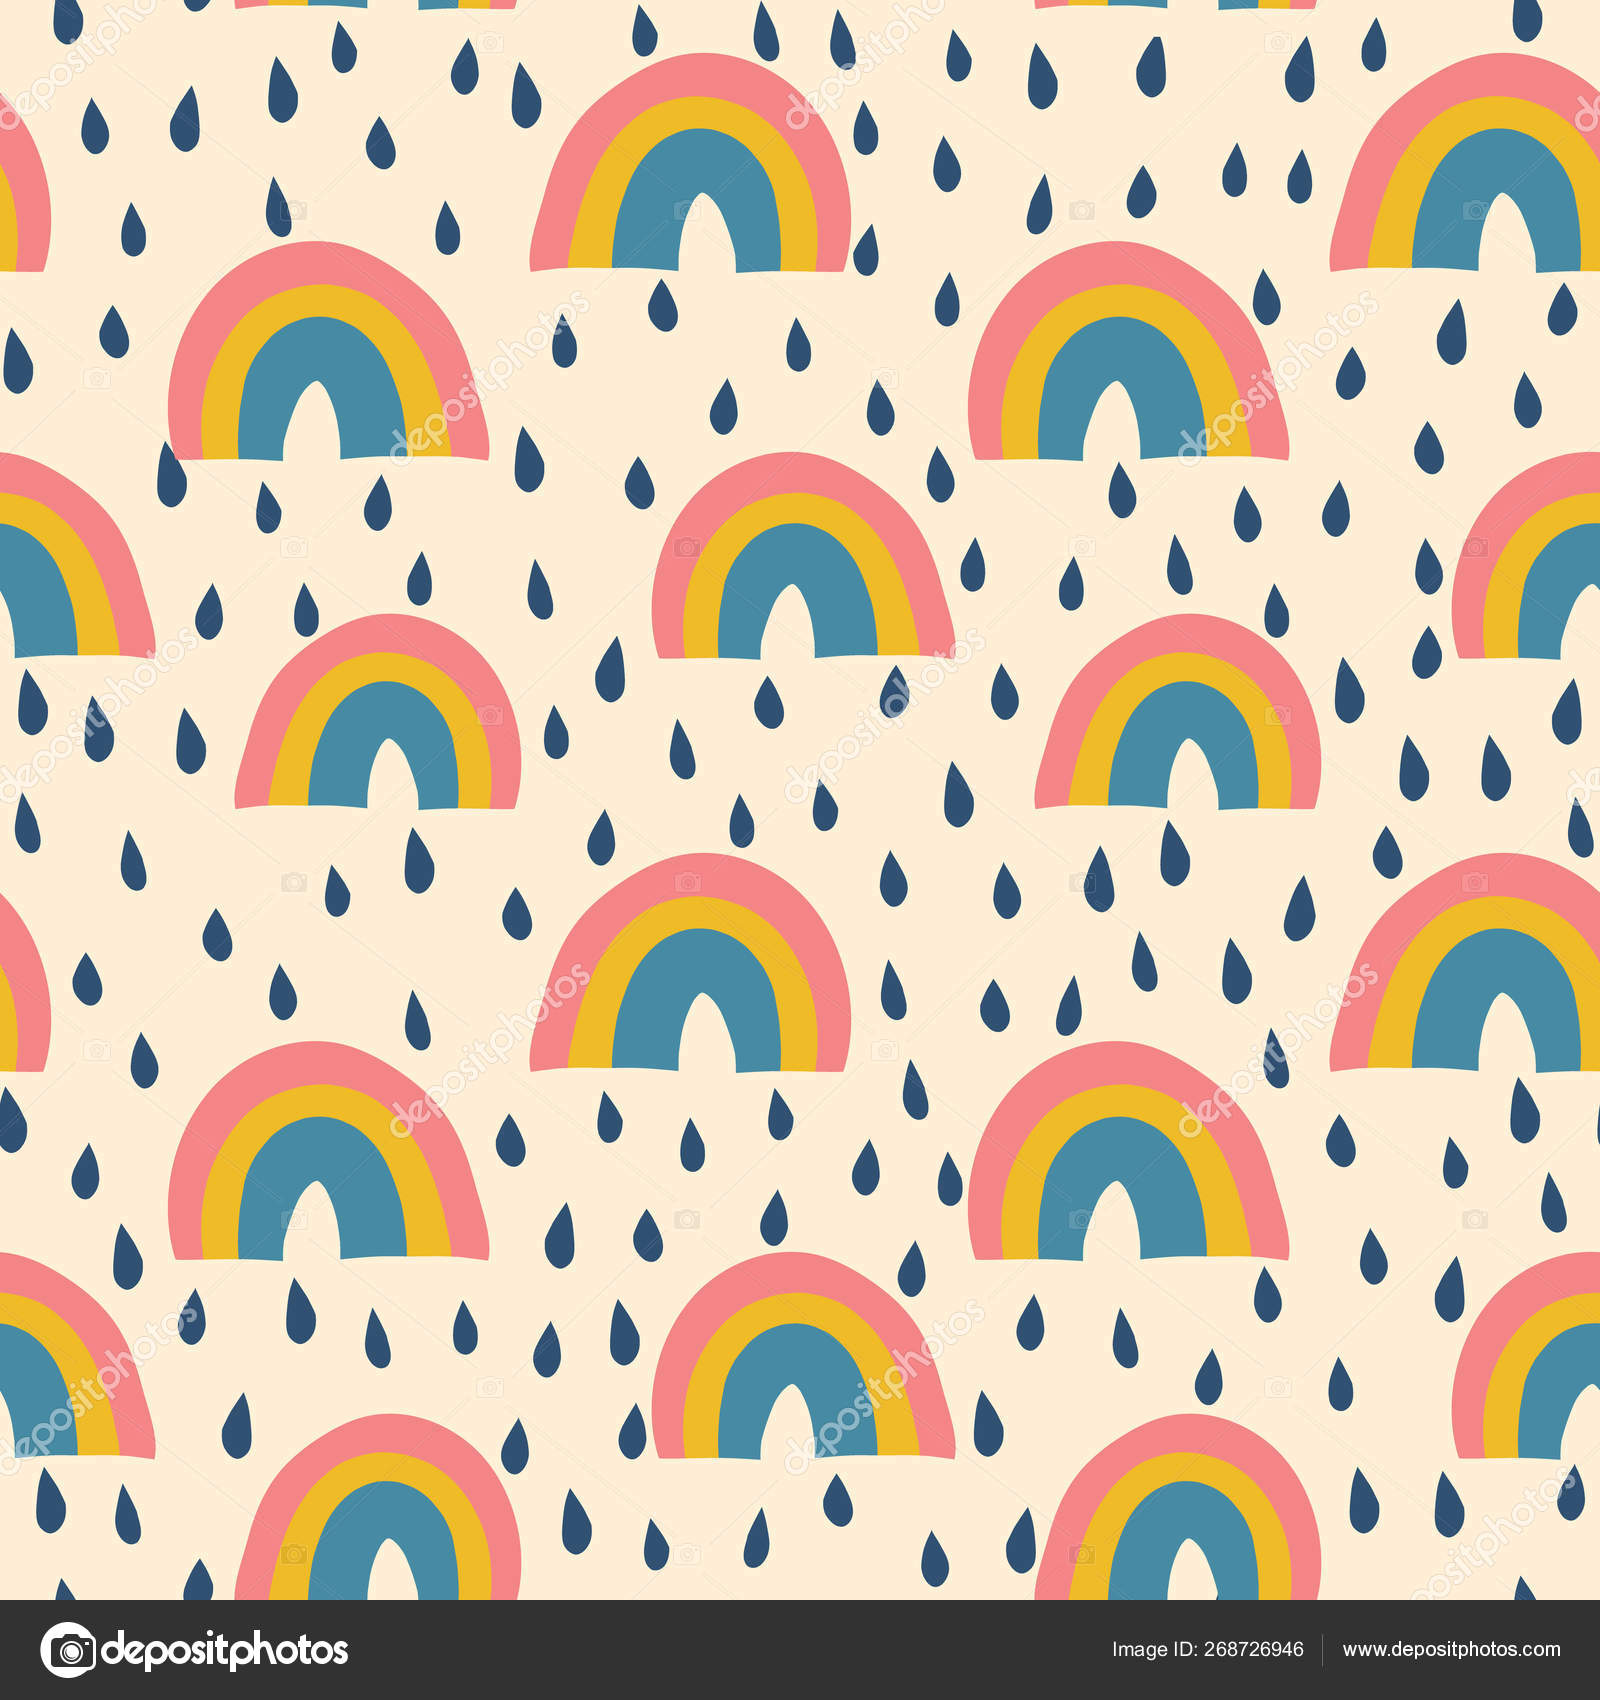 Retro rainbow abstract background vintage 70s Vector Image